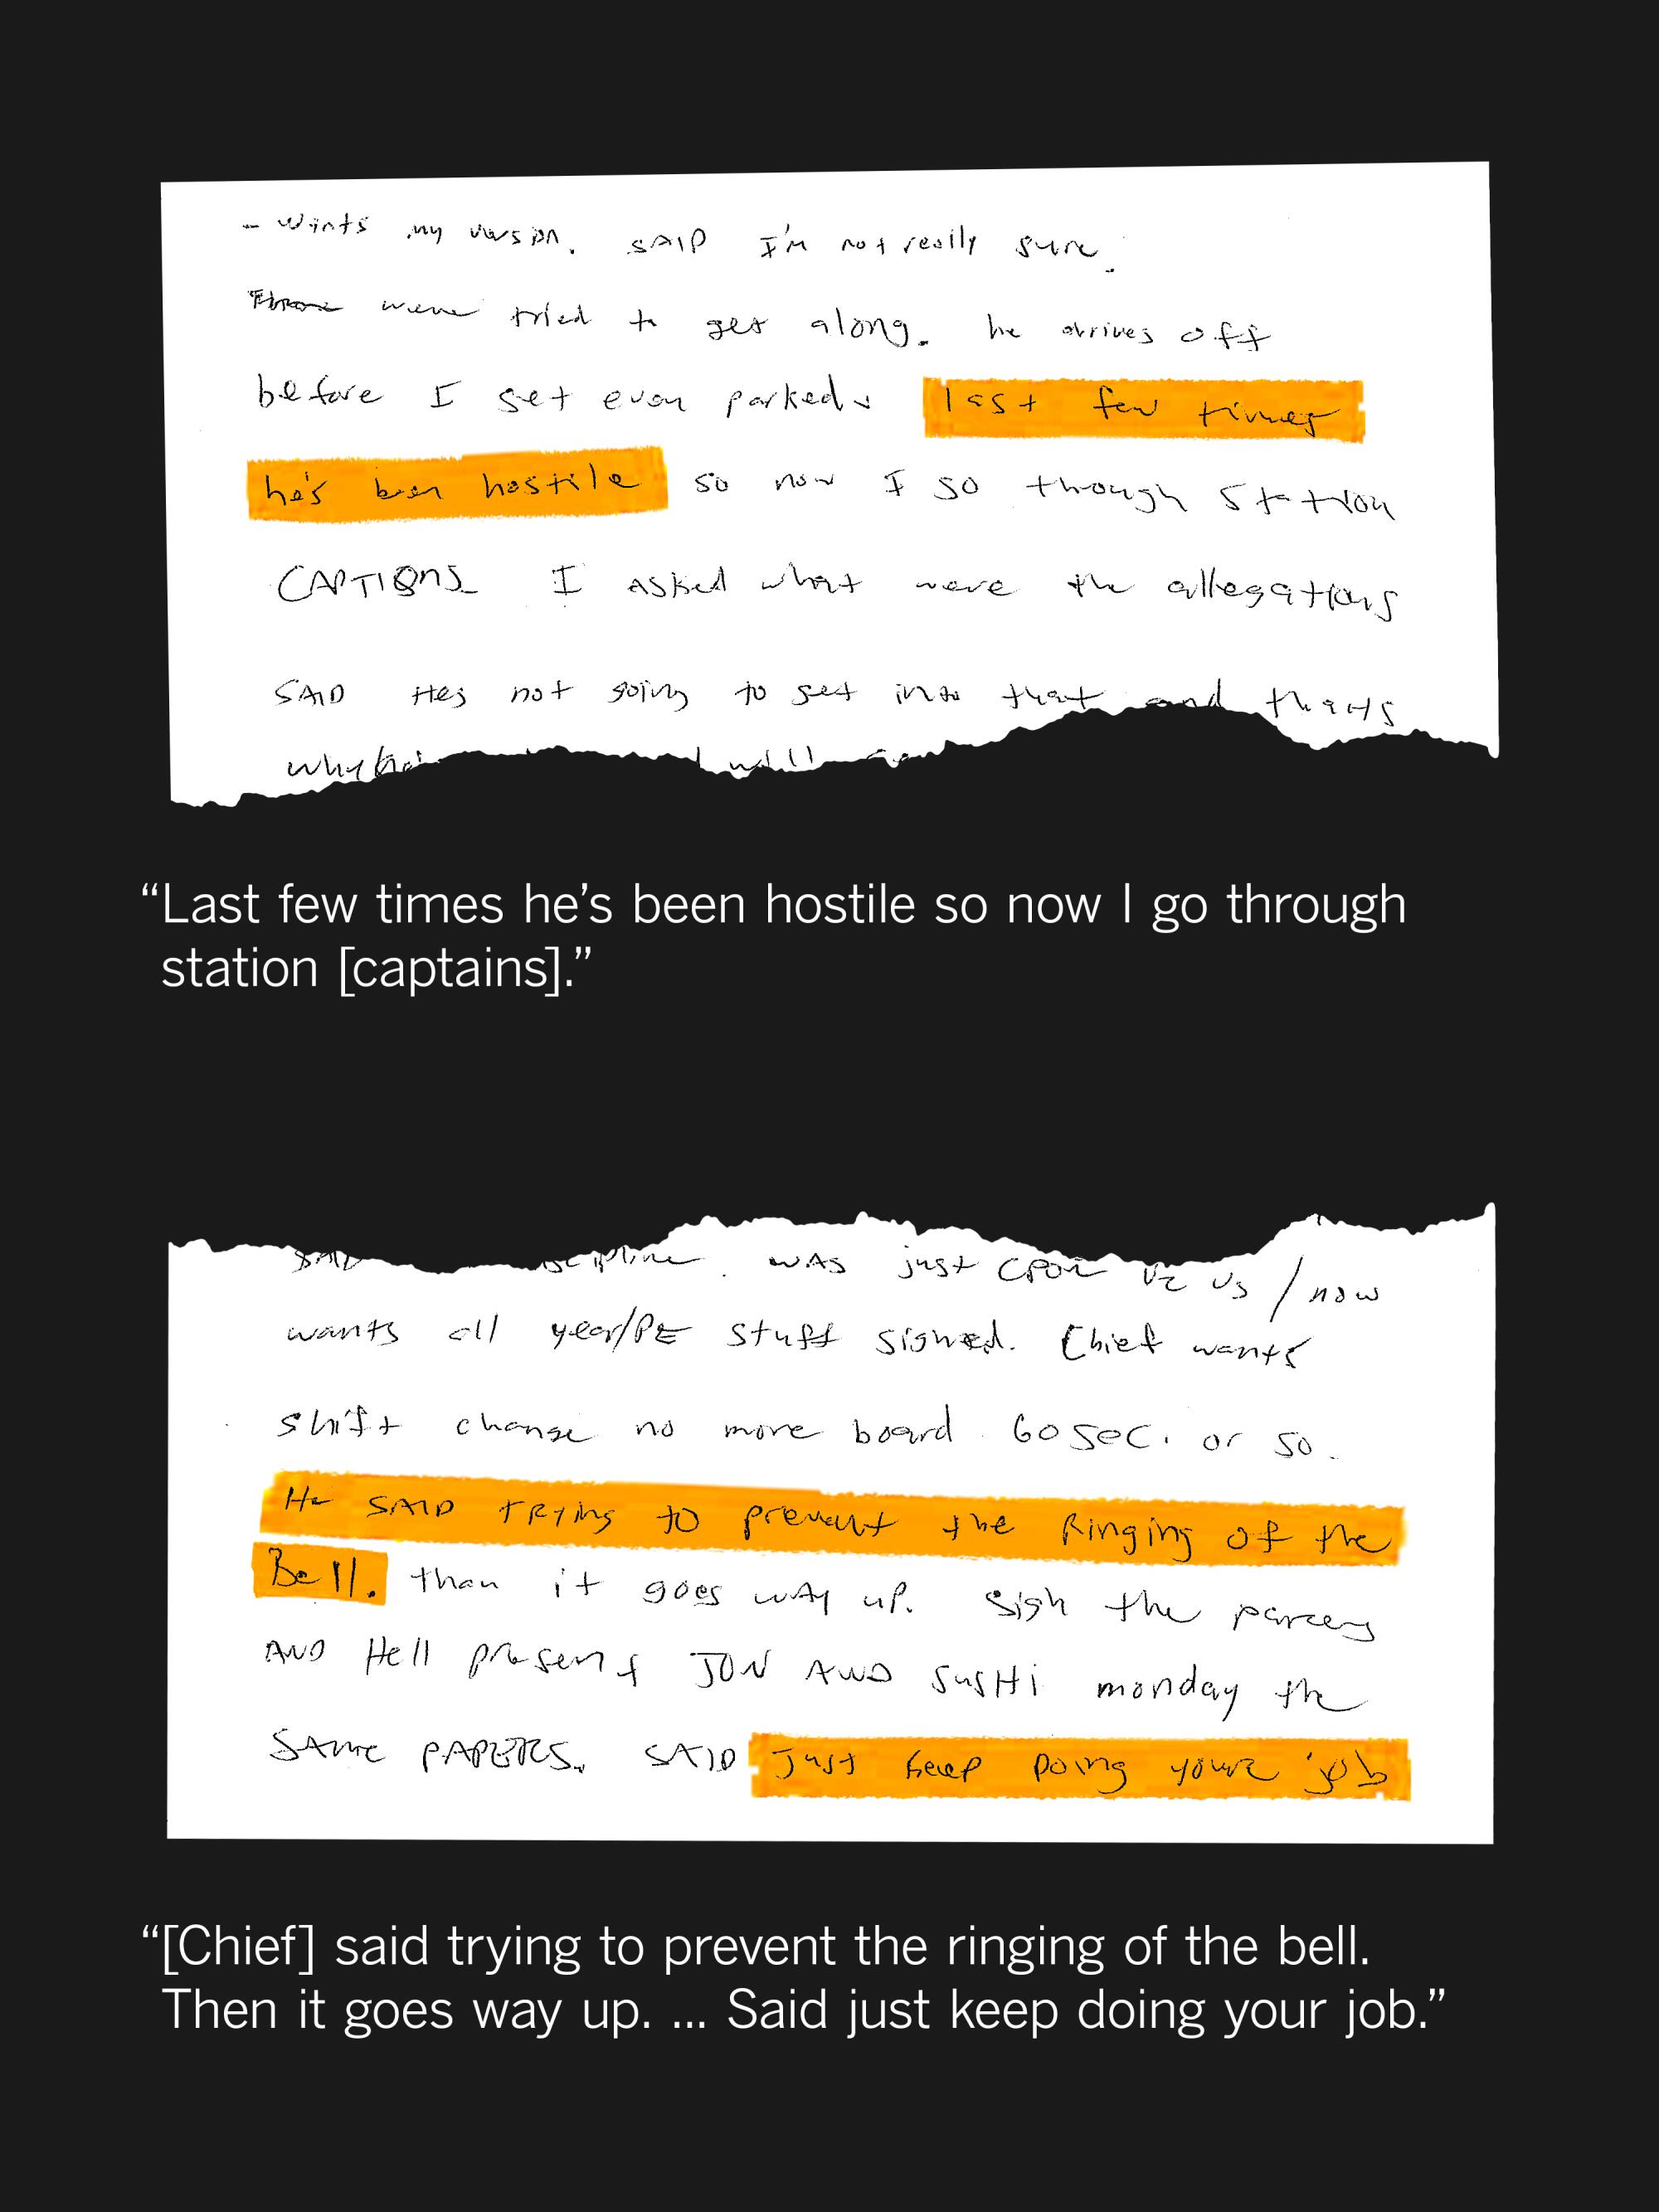 Handwritten notes "Last few times he’s been hostile.” “[Chief] said just keep doing your job.”